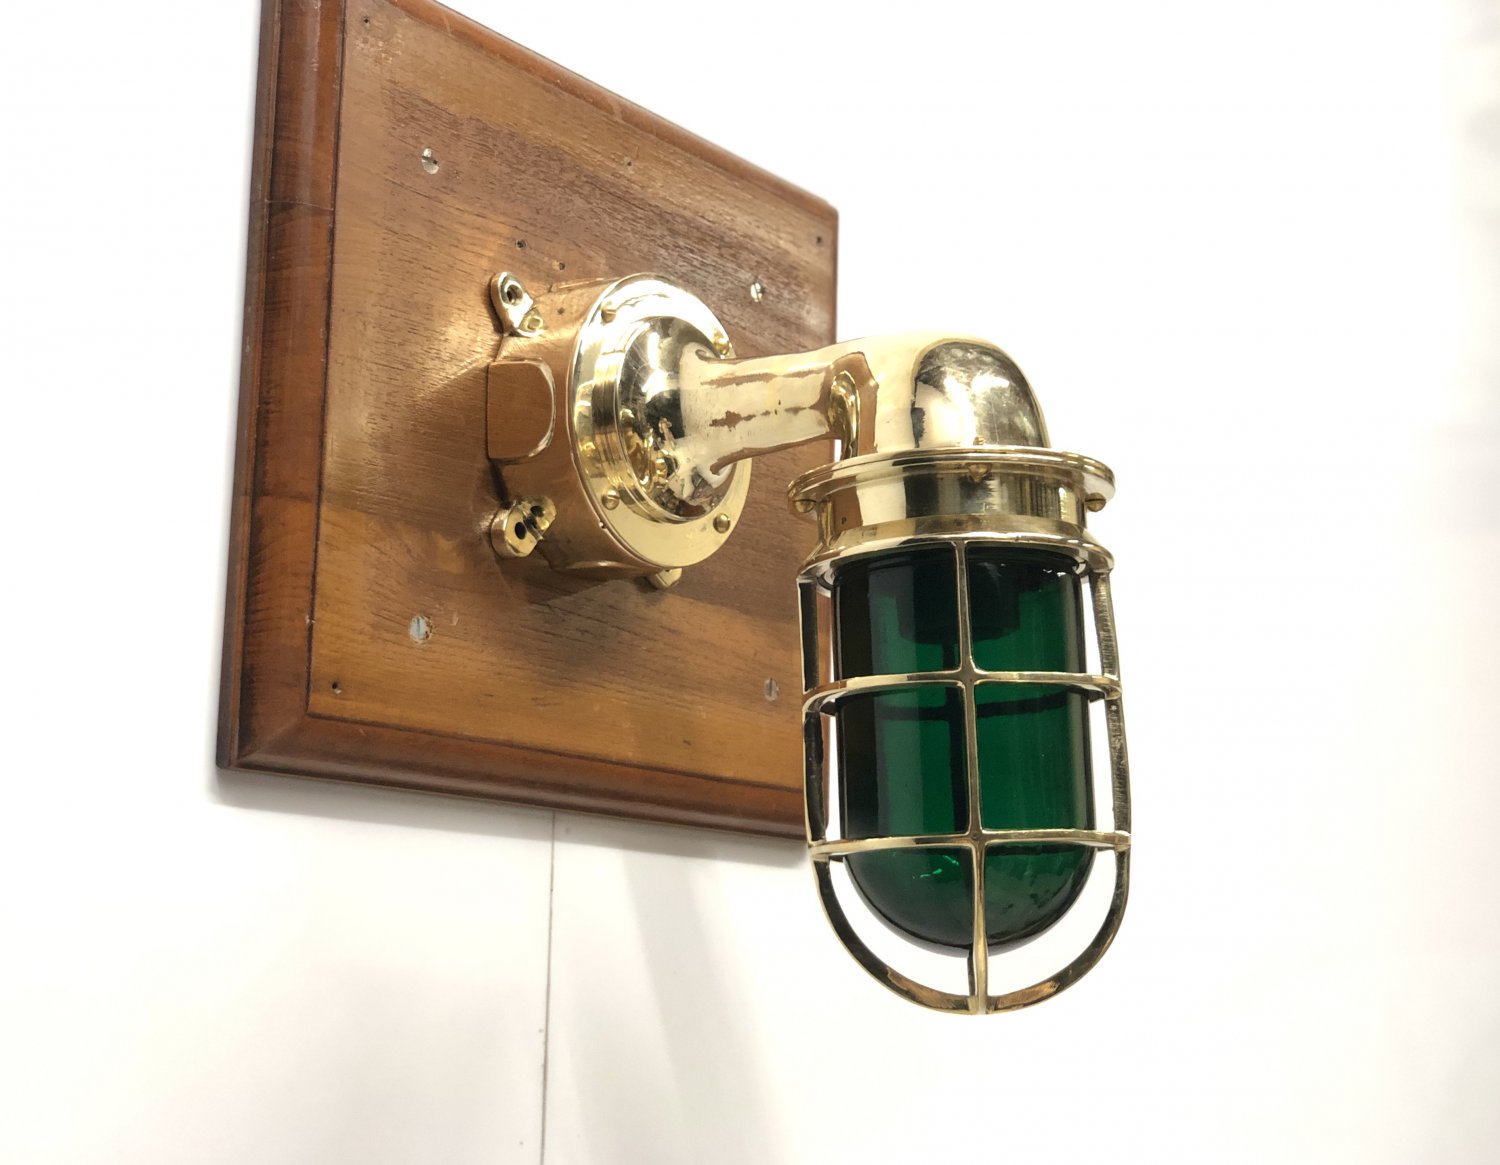 Vintage Style Solid Brass Wall Sconce Light Fixture - Green Glass